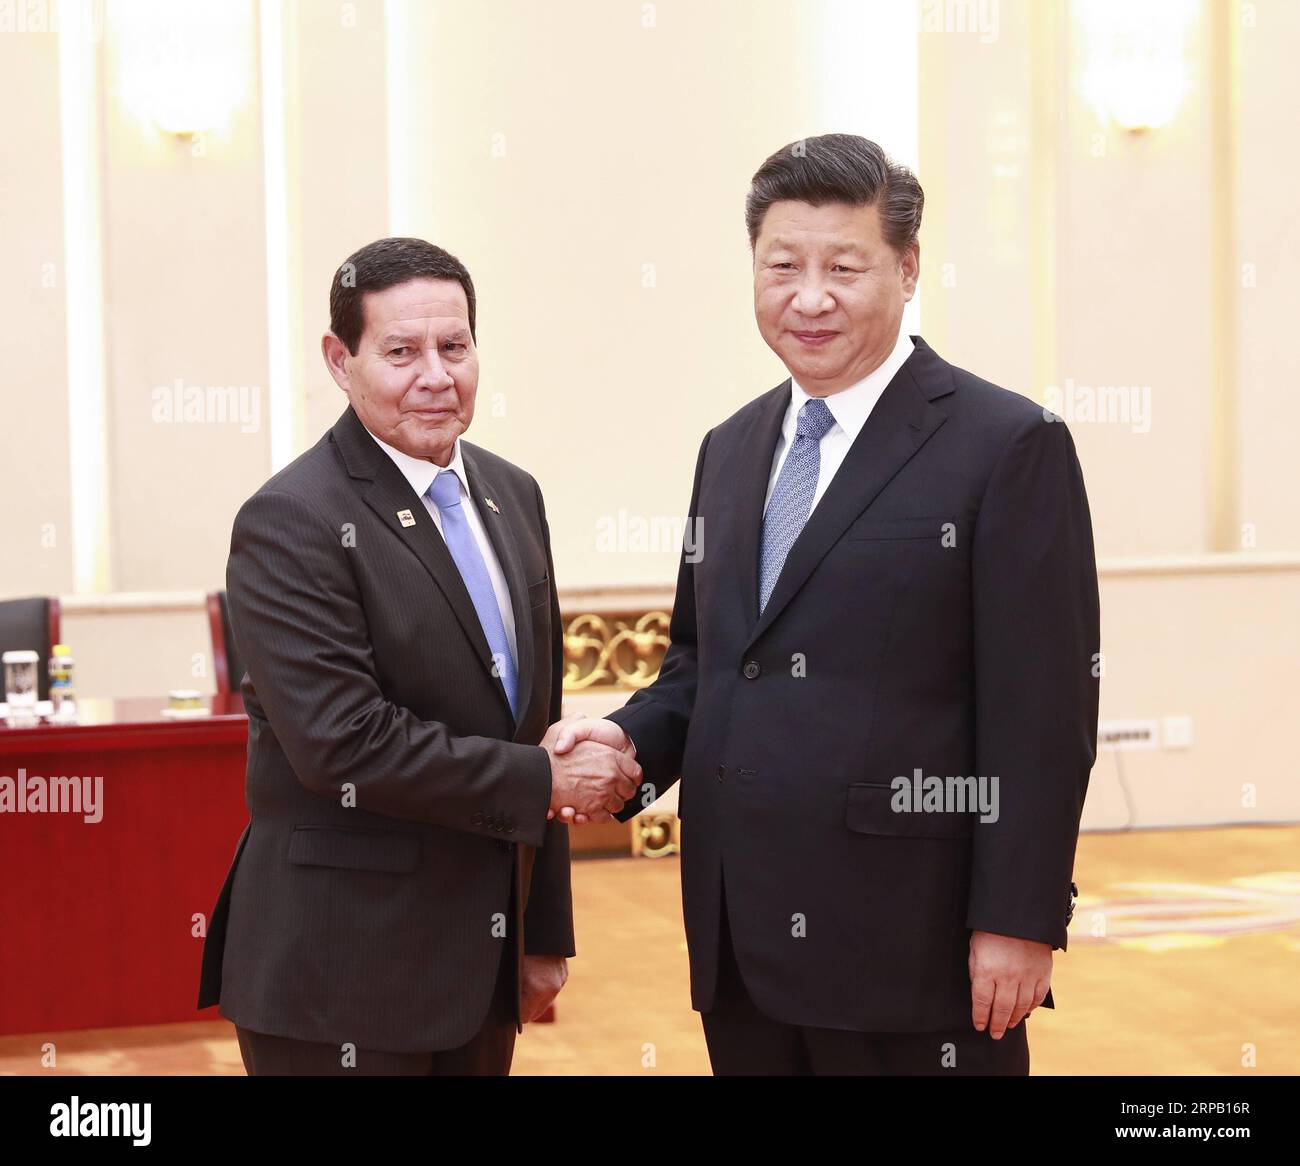 (190524) -- BEIJING, May 24, 2019 (Xinhua) -- Chinese President Xi Jinping meets with Brazilian Vice President Hamilton Mourao at the Great Hall of the People in Beijing, Capital of China, May 24, 2019. (Xinhua/Pang Xinglei) CHINA-BEIJING-XI JINPING-BRAZILIAN VICE PRESIDENT-MEETING(CN) PUBLICATIONxNOTxINxCHN Stock Photo